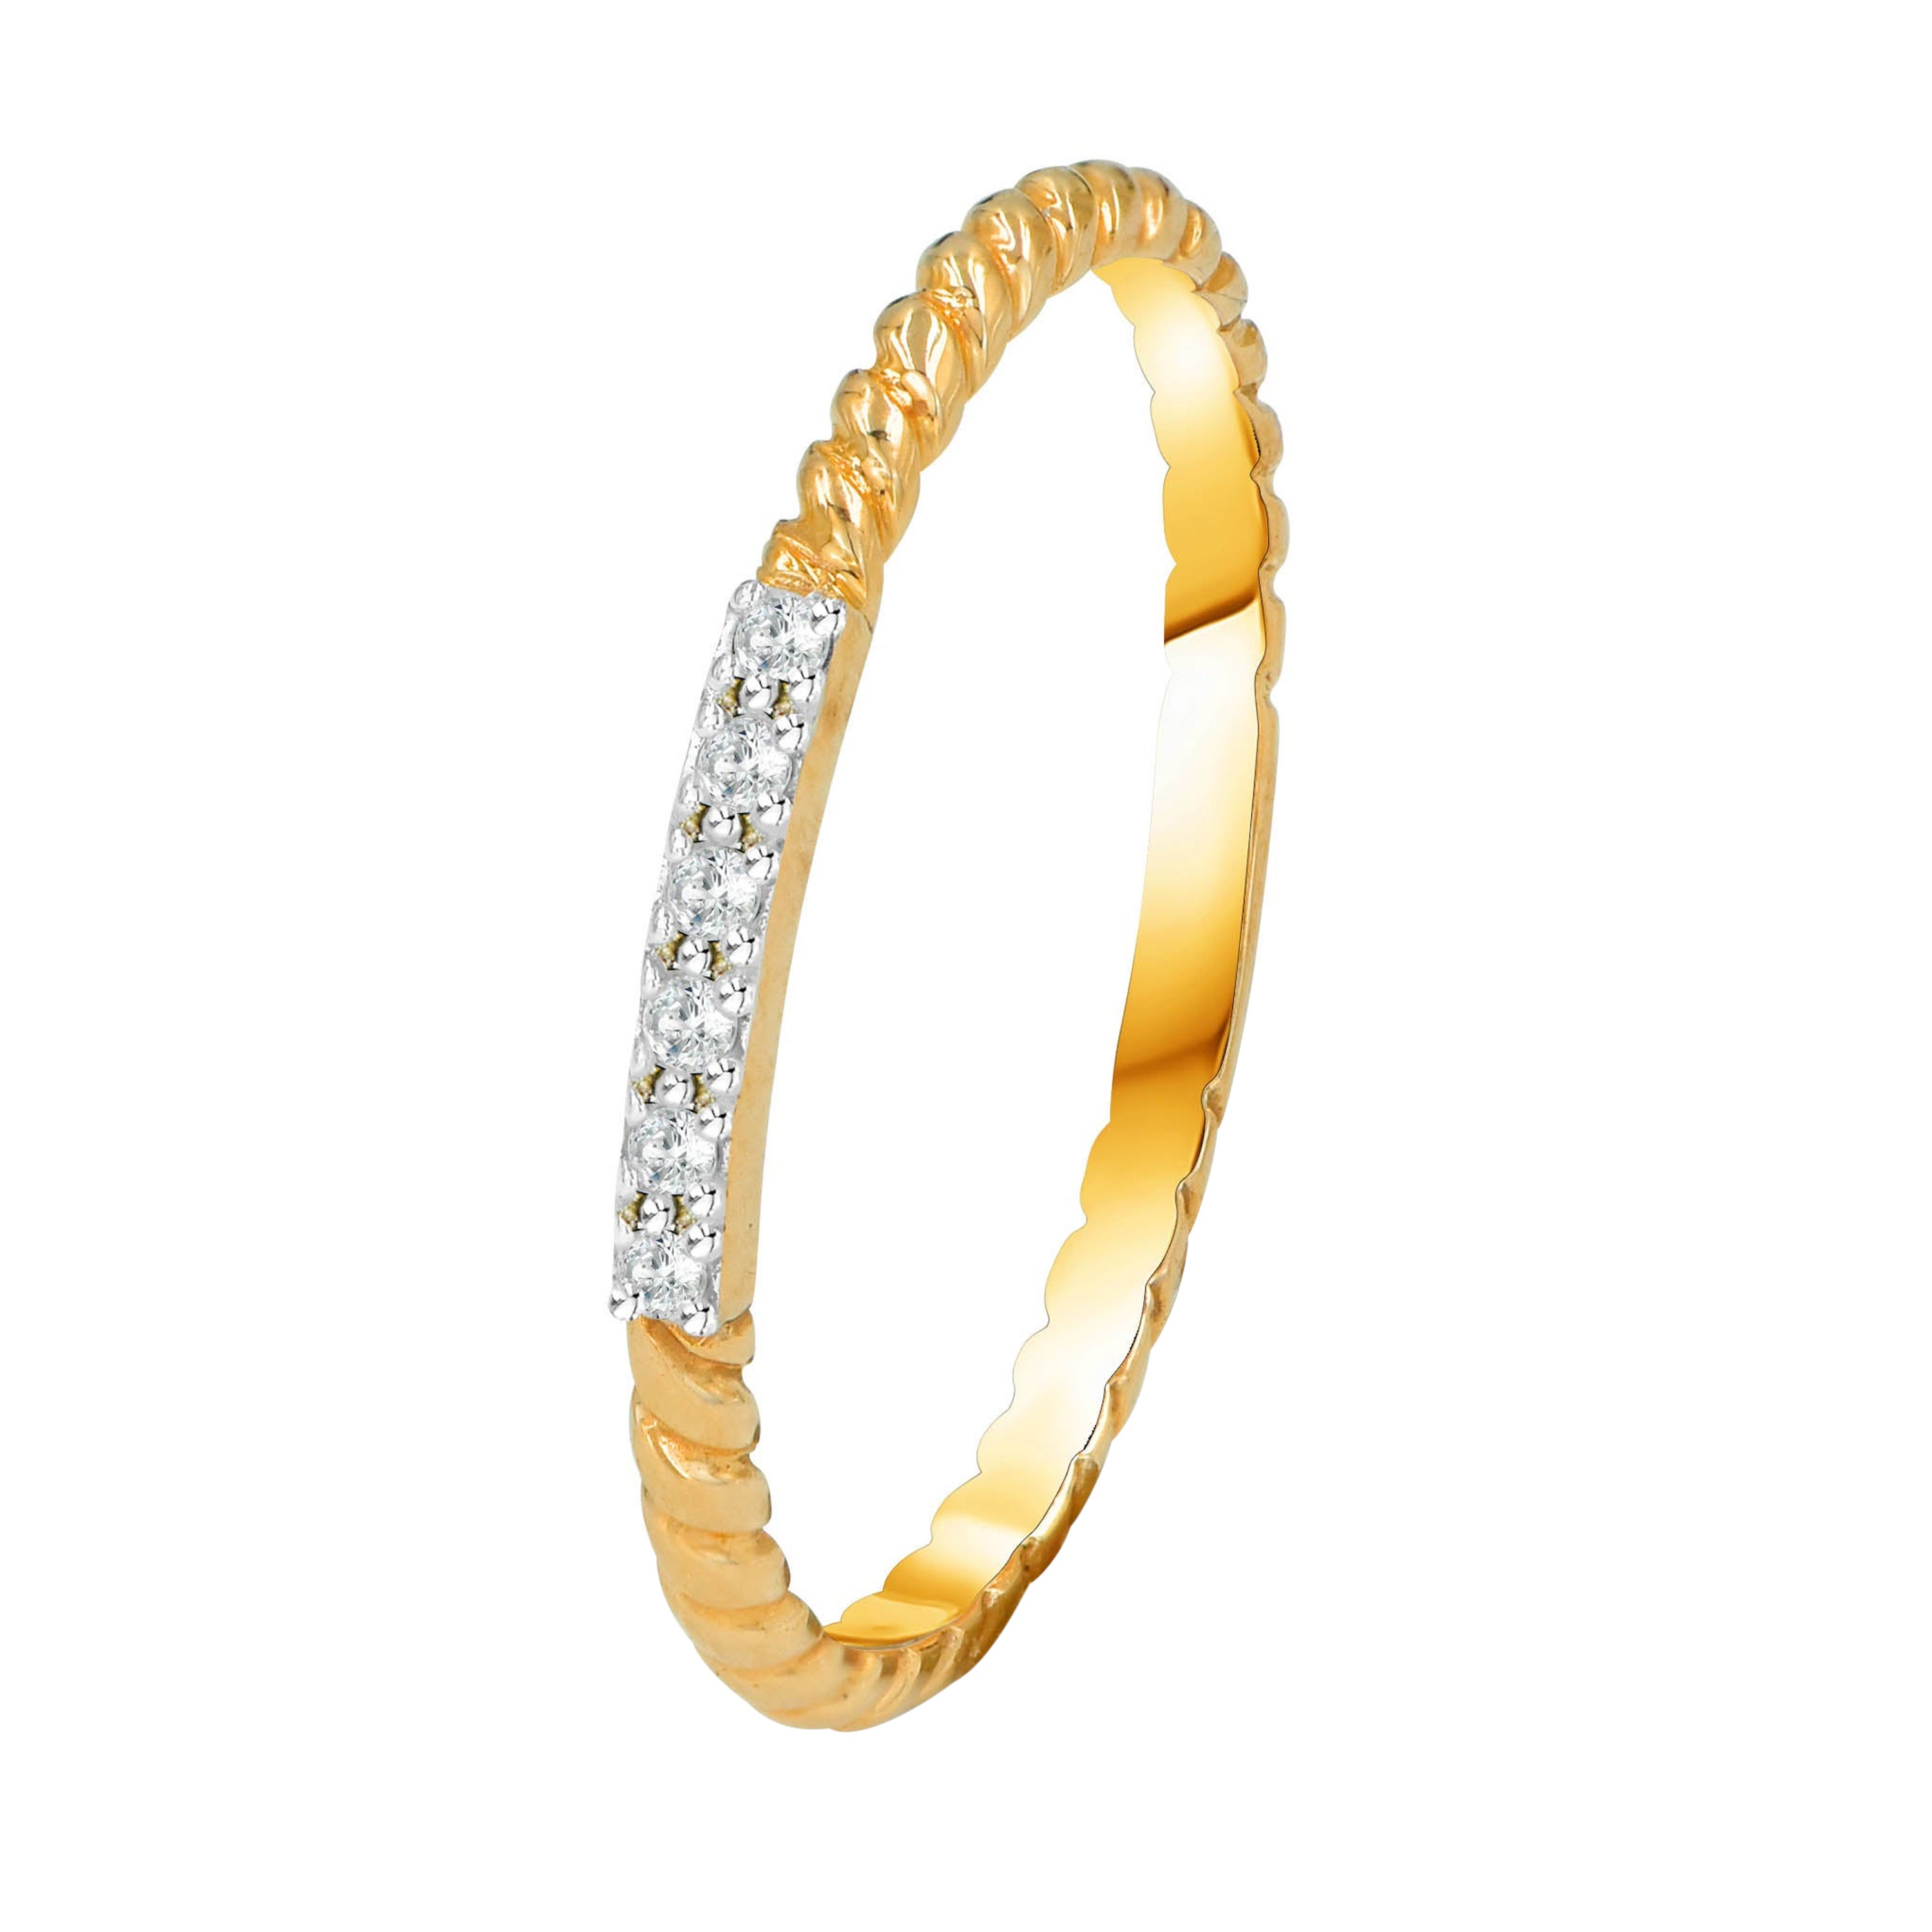 18K Gold and Diamond Ring Stackable Ring Unique Diamond Wedding Band